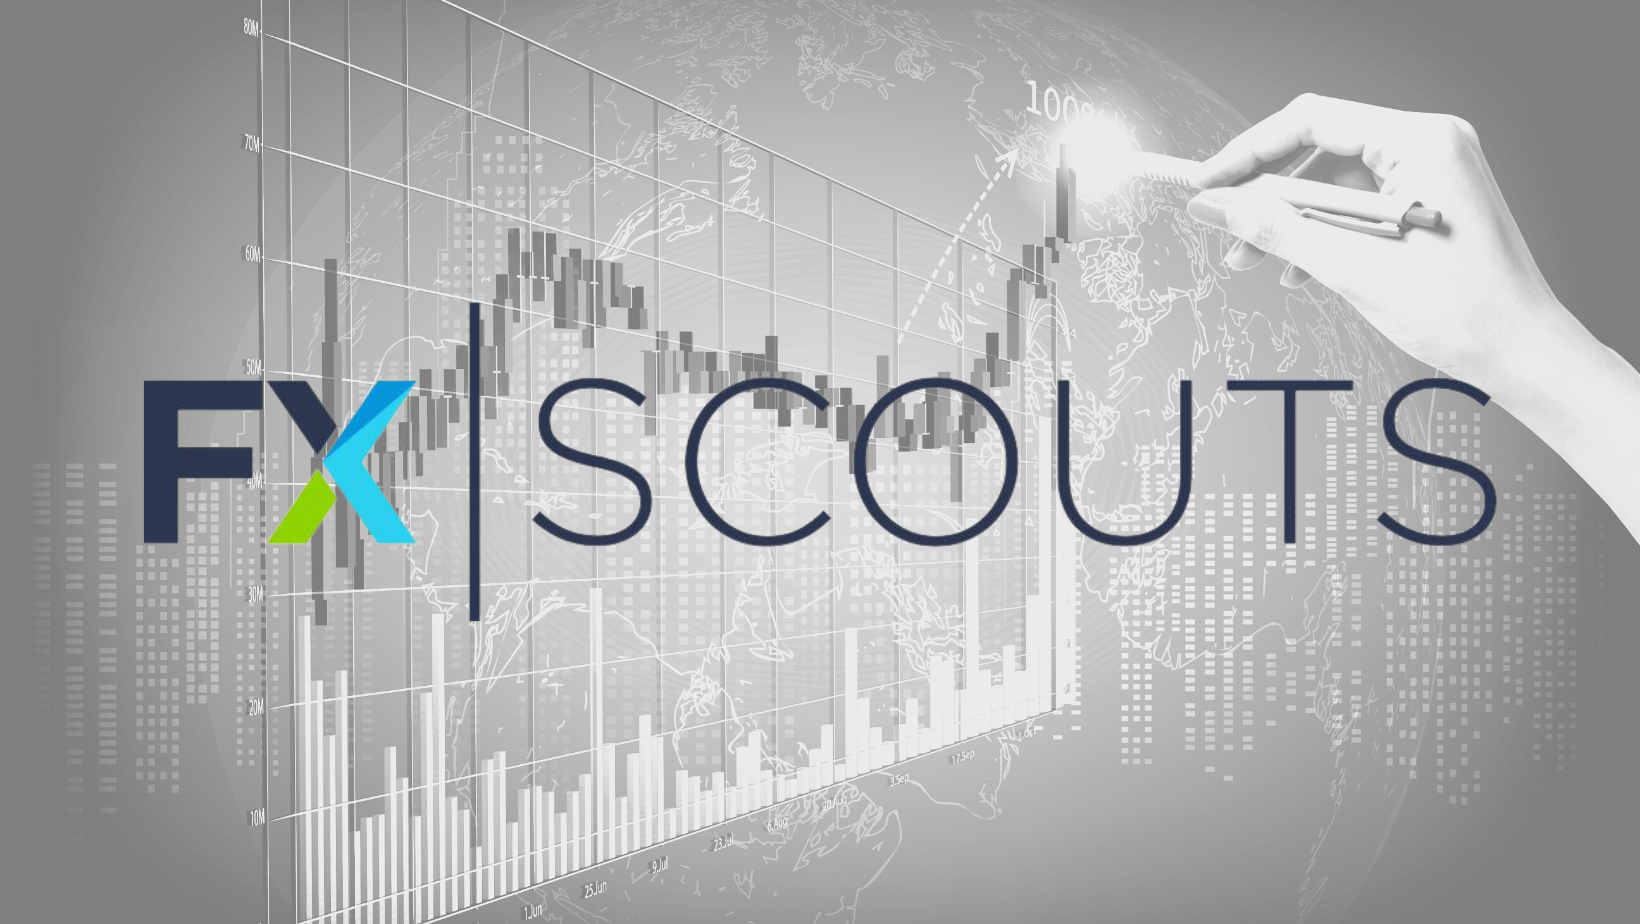 FX-Australia and FX India rebrand as FxScouts, aligning with the global FxScouts brand